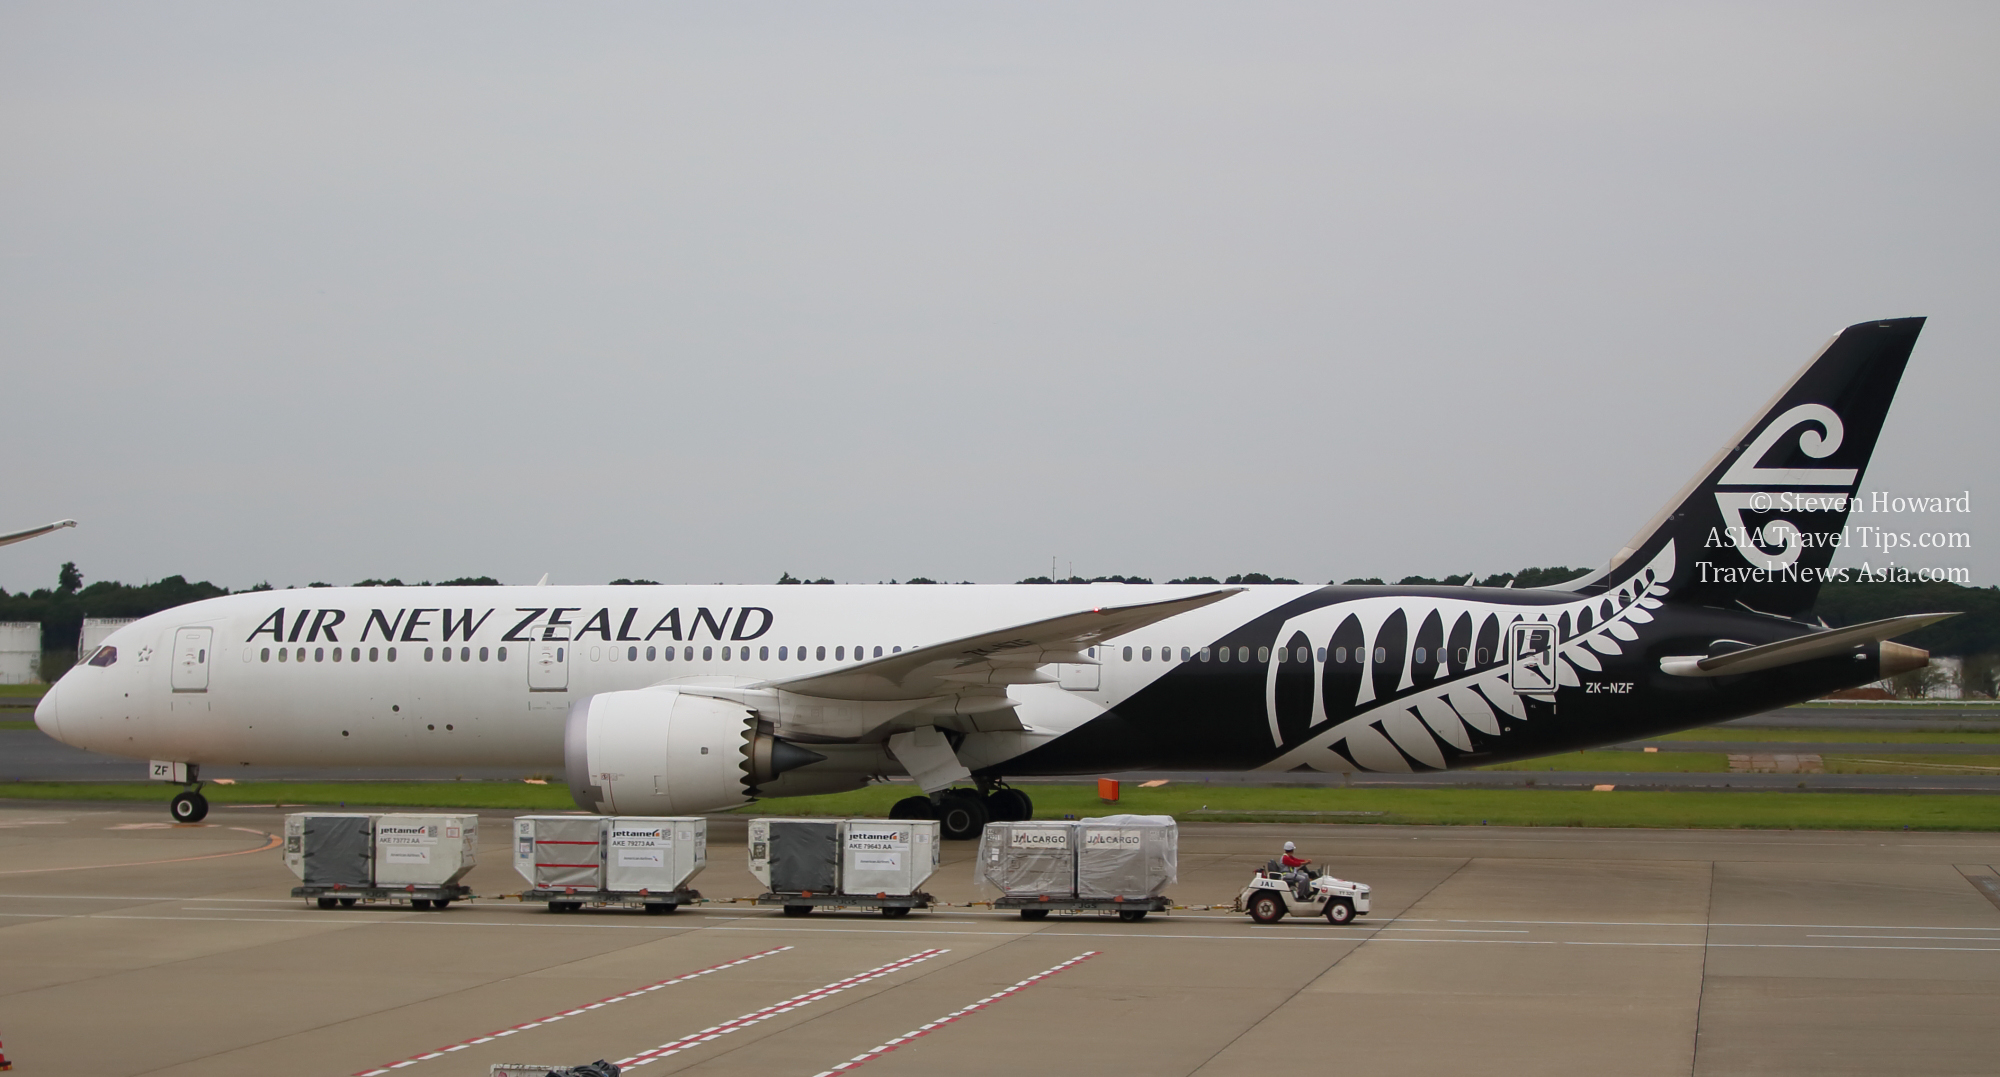 Air New Zealand Boeing 787-9 reg: ZK-NZF. Picture by Steven Howard of TravelNewsAsia.com Click to enlarge.